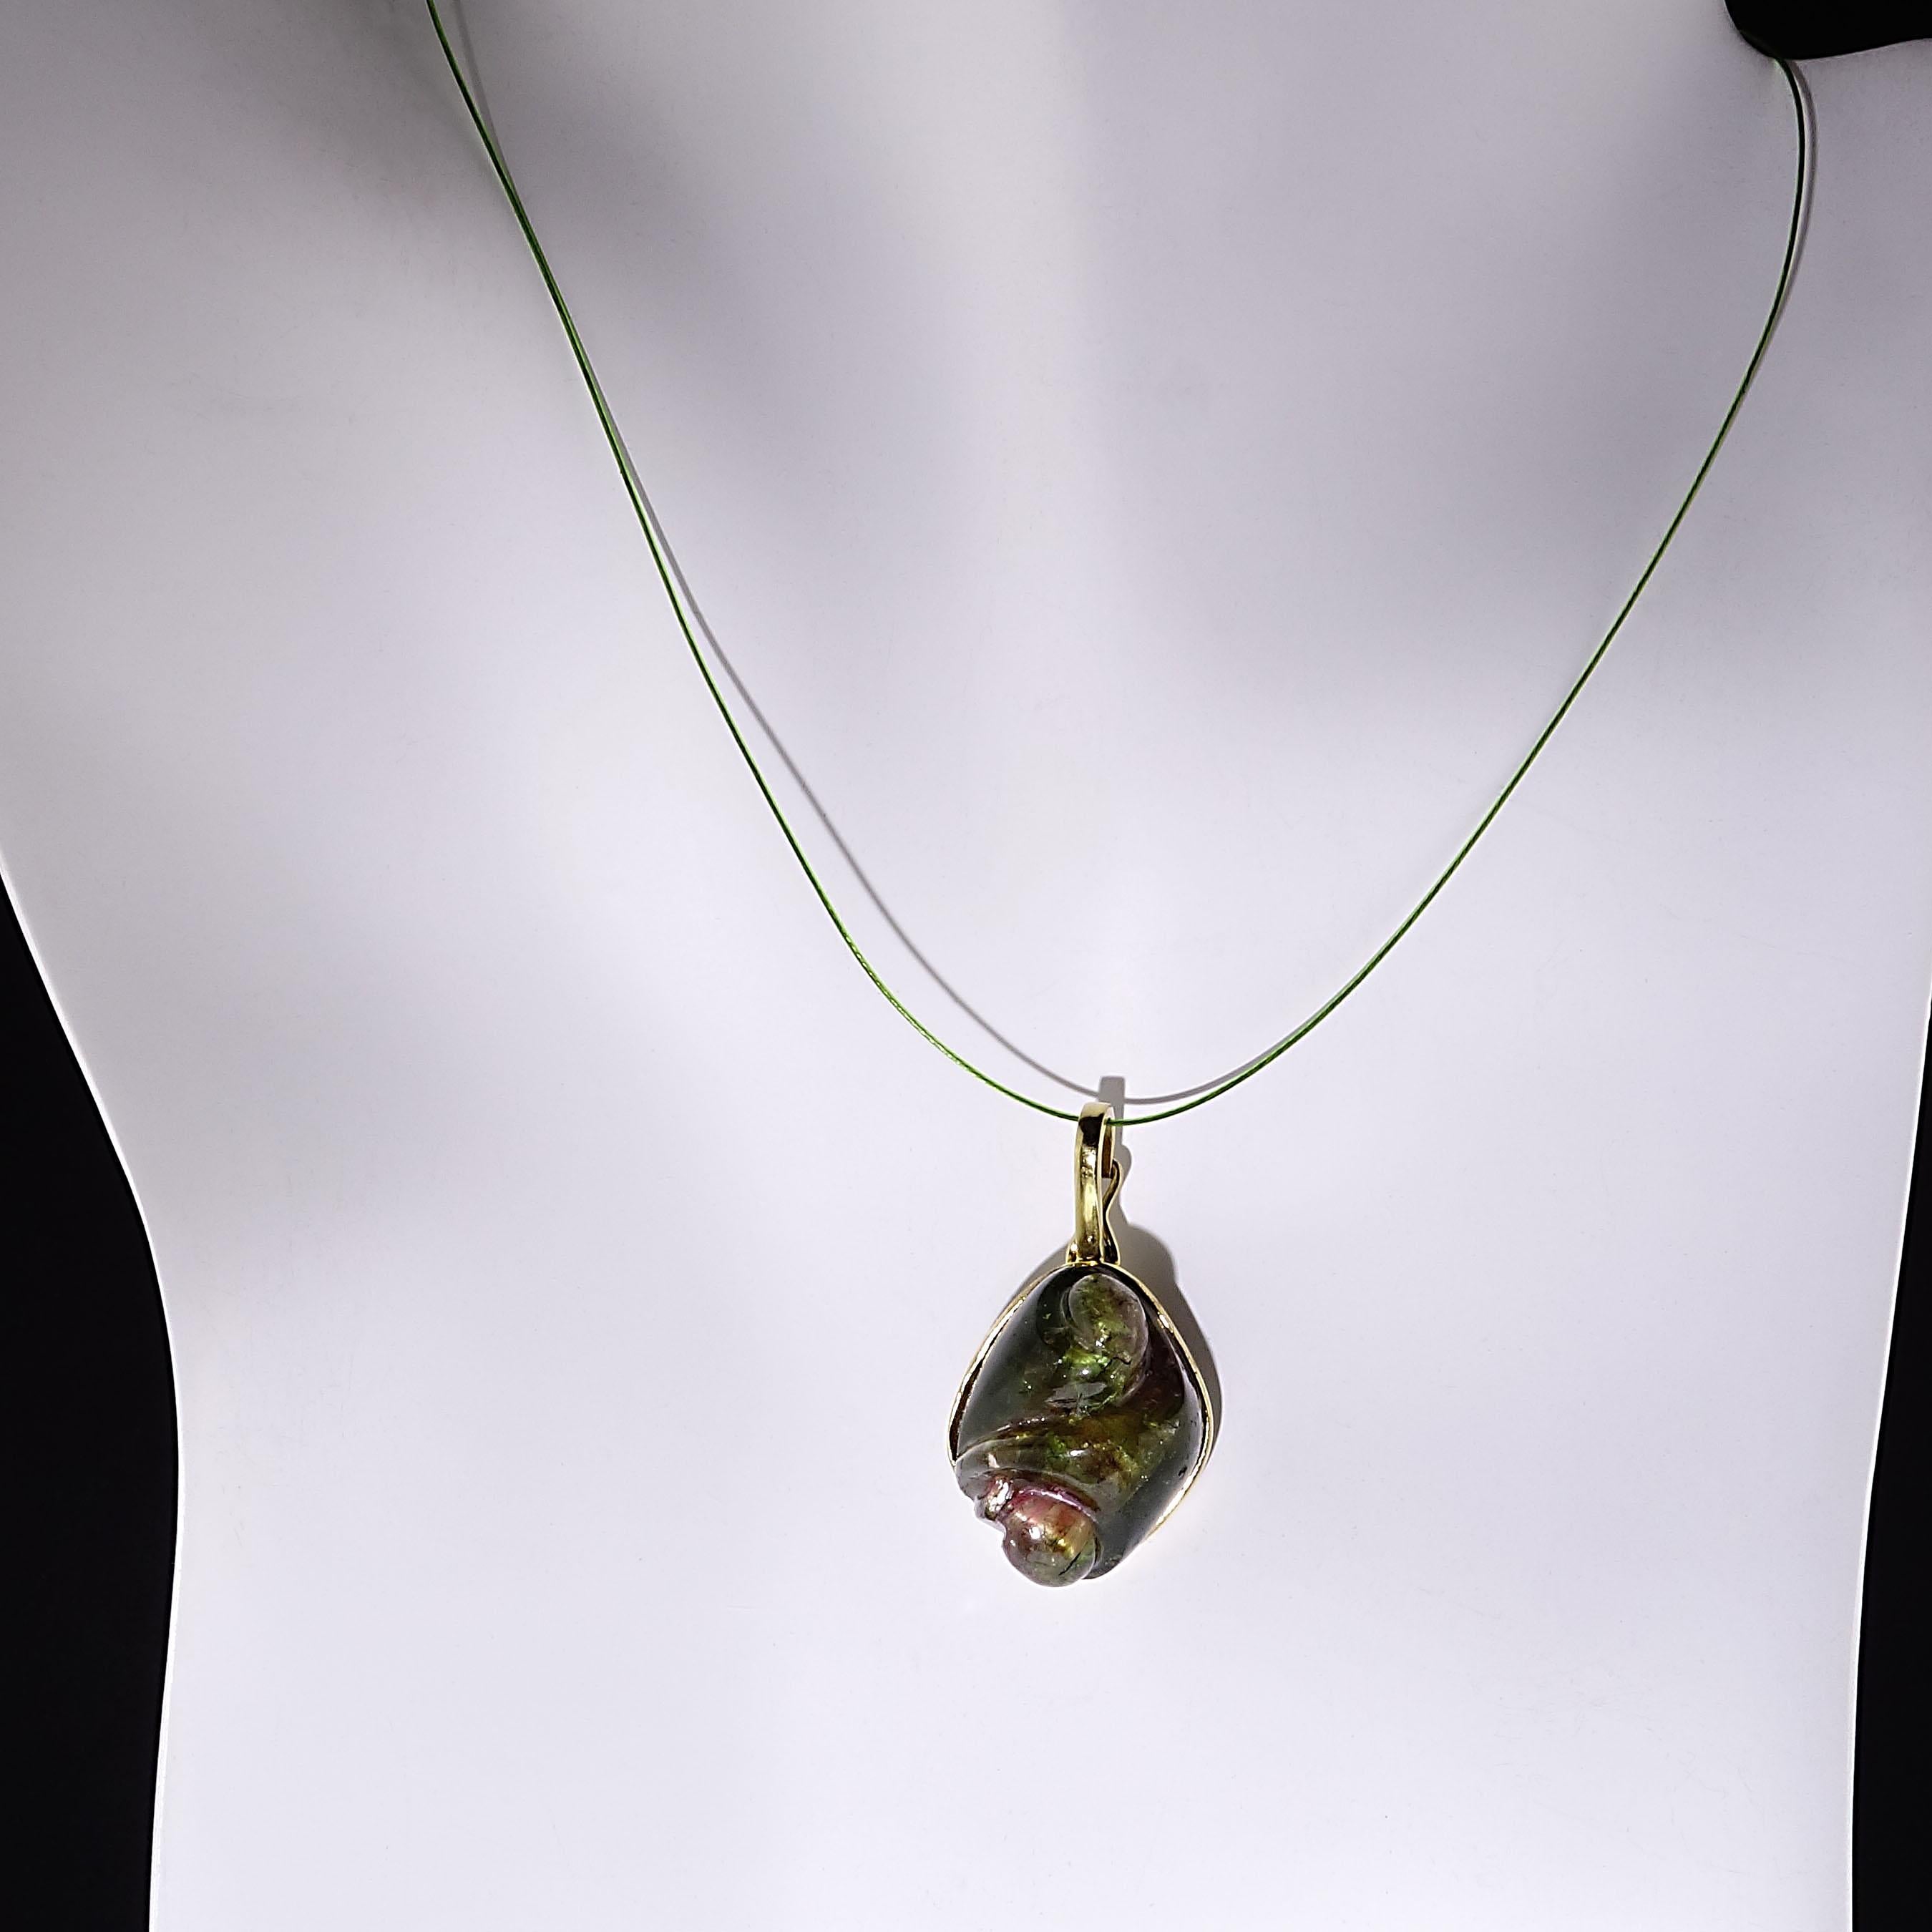 Artisan Gemjunky Carved Bi-Color Tourmaline Pendant with Gold Bezel and Hinged Bail